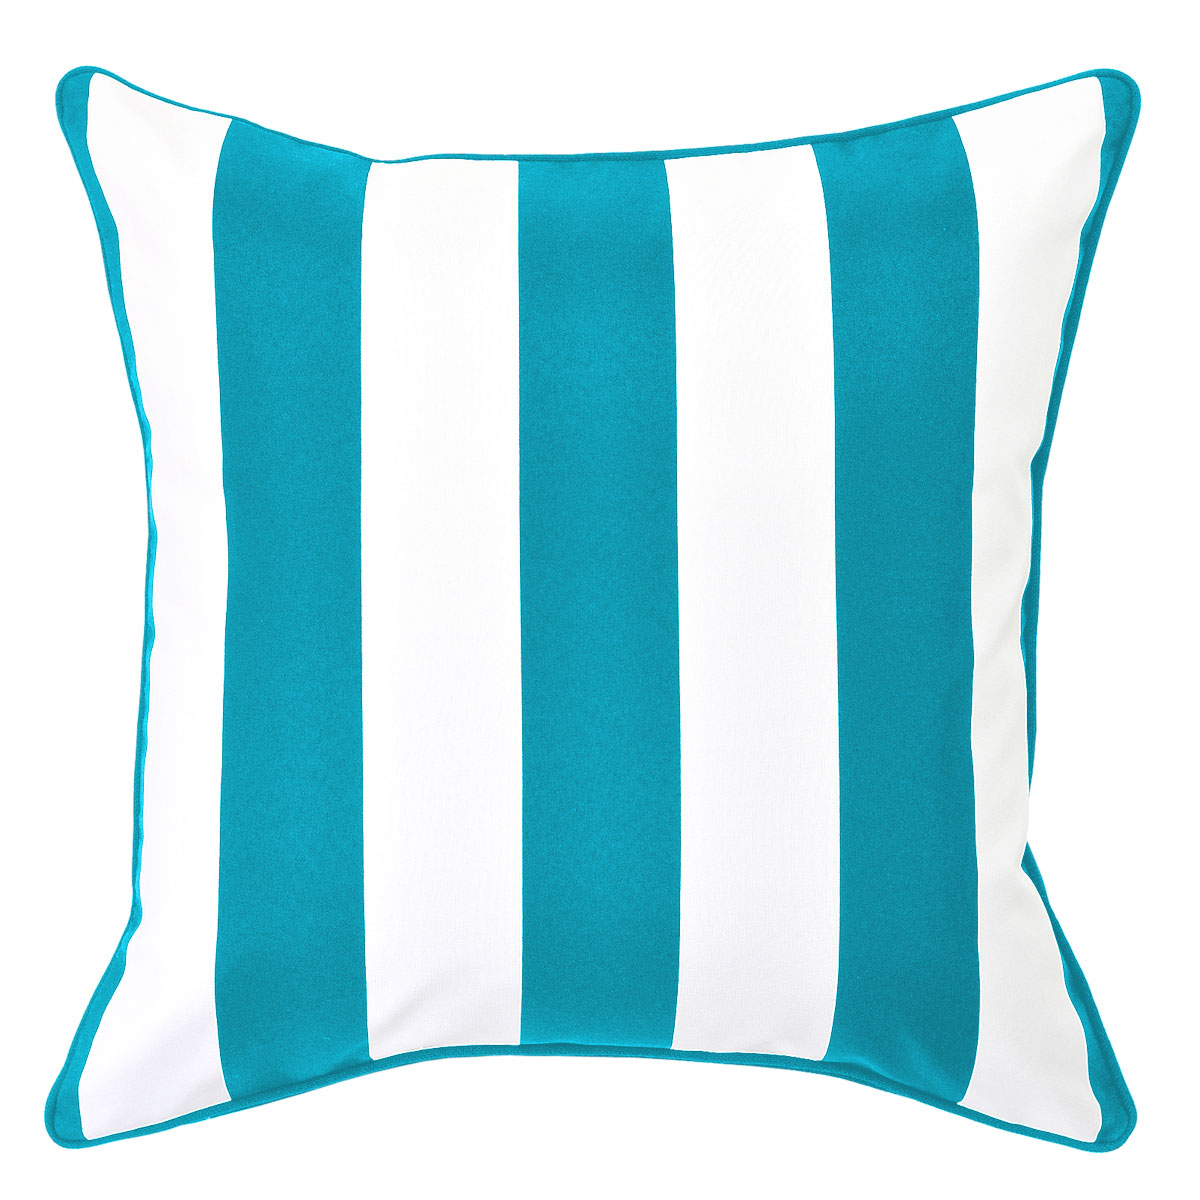 Mallacoota Turquoise Outdoor Cushion with Turquoise Piping - 45x45cm